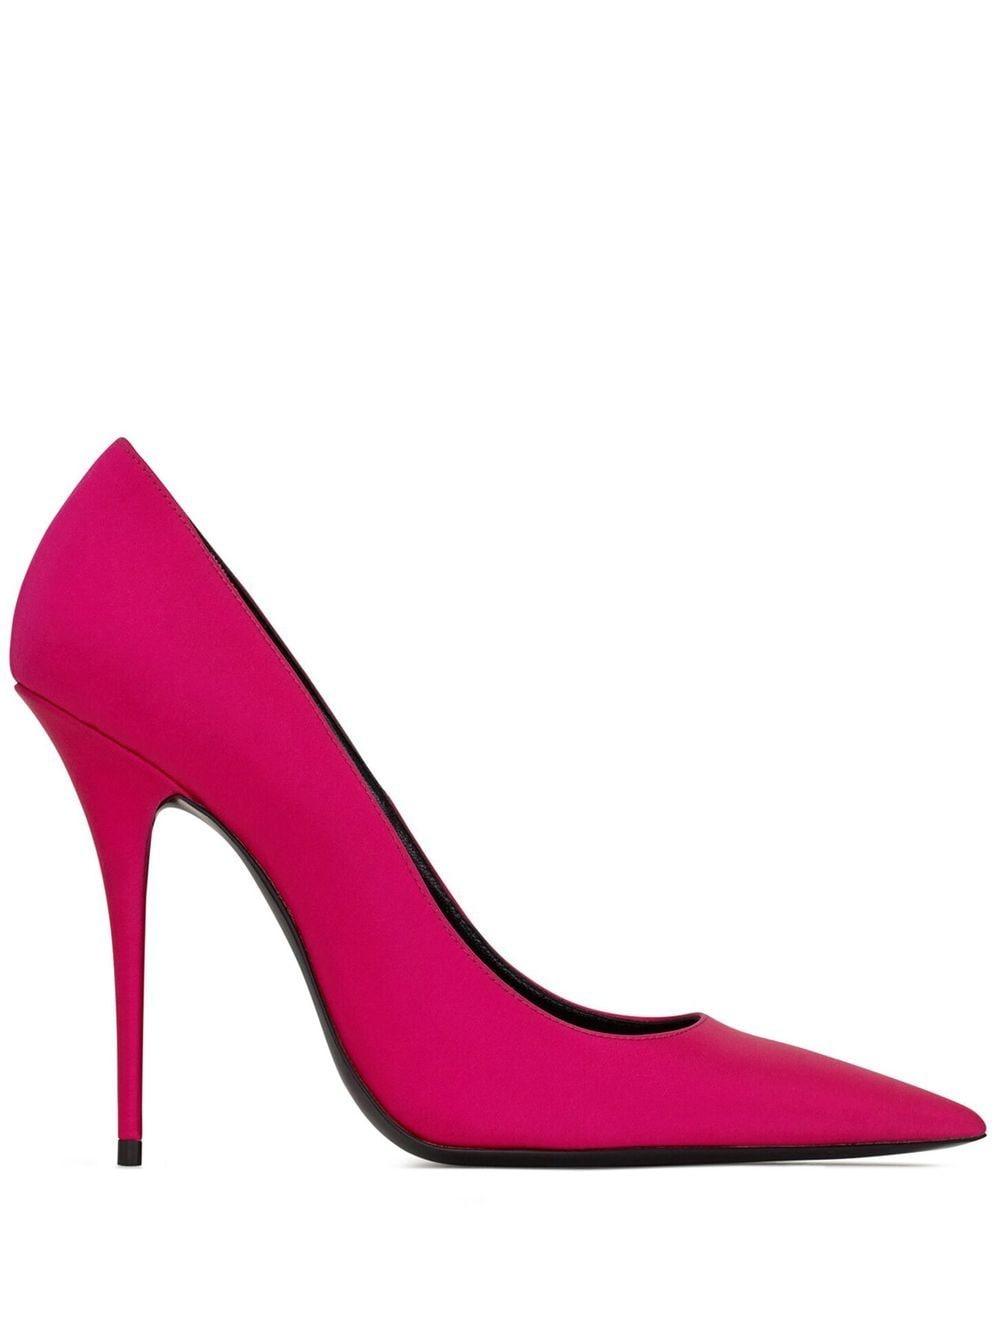 Saint Laurent Marylin 110mm Satin Pumps in Pink | Lyst